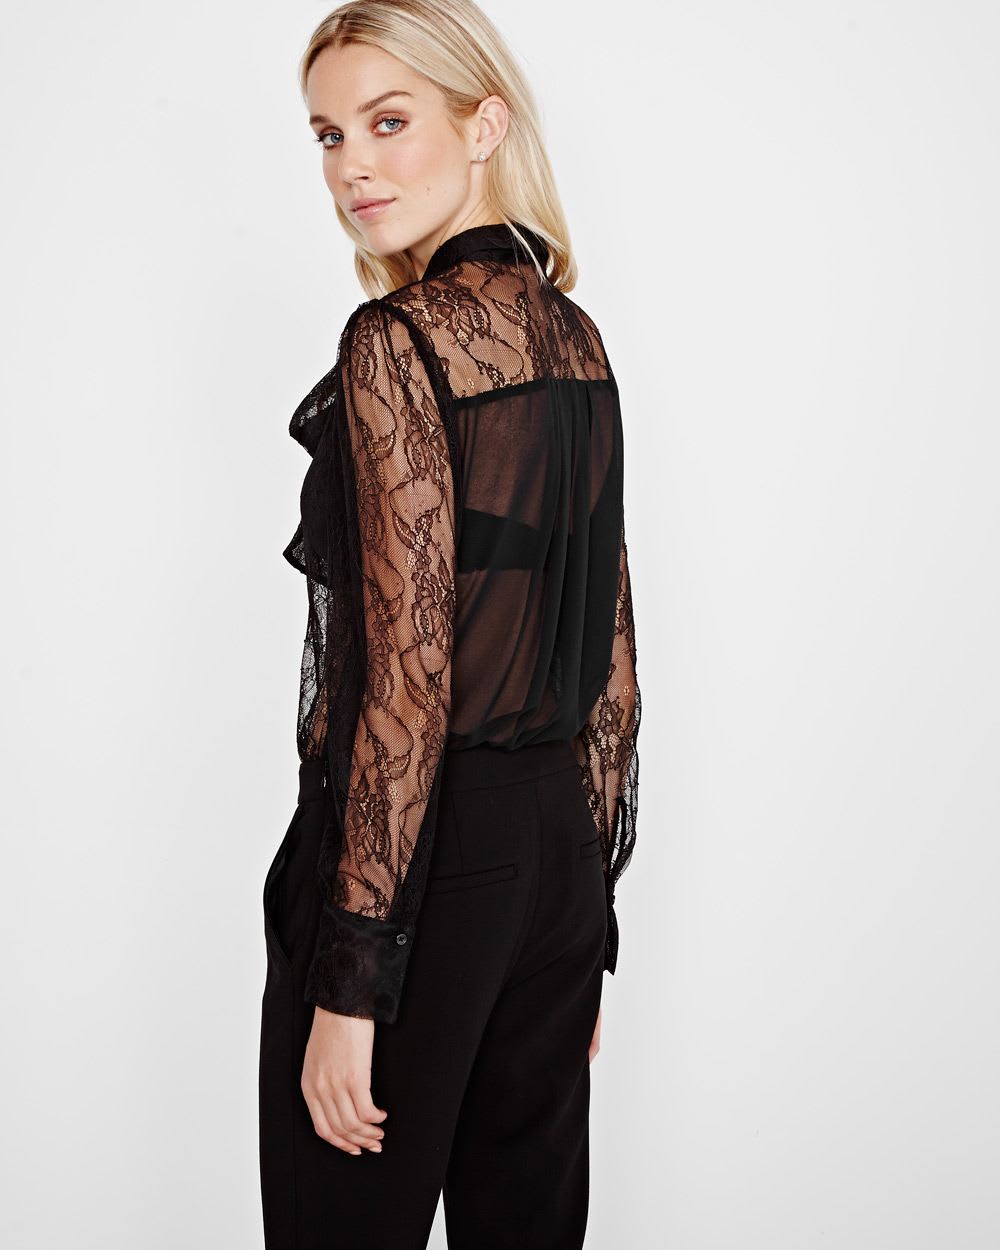 Lace blouse with detachable bow | RW&CO.